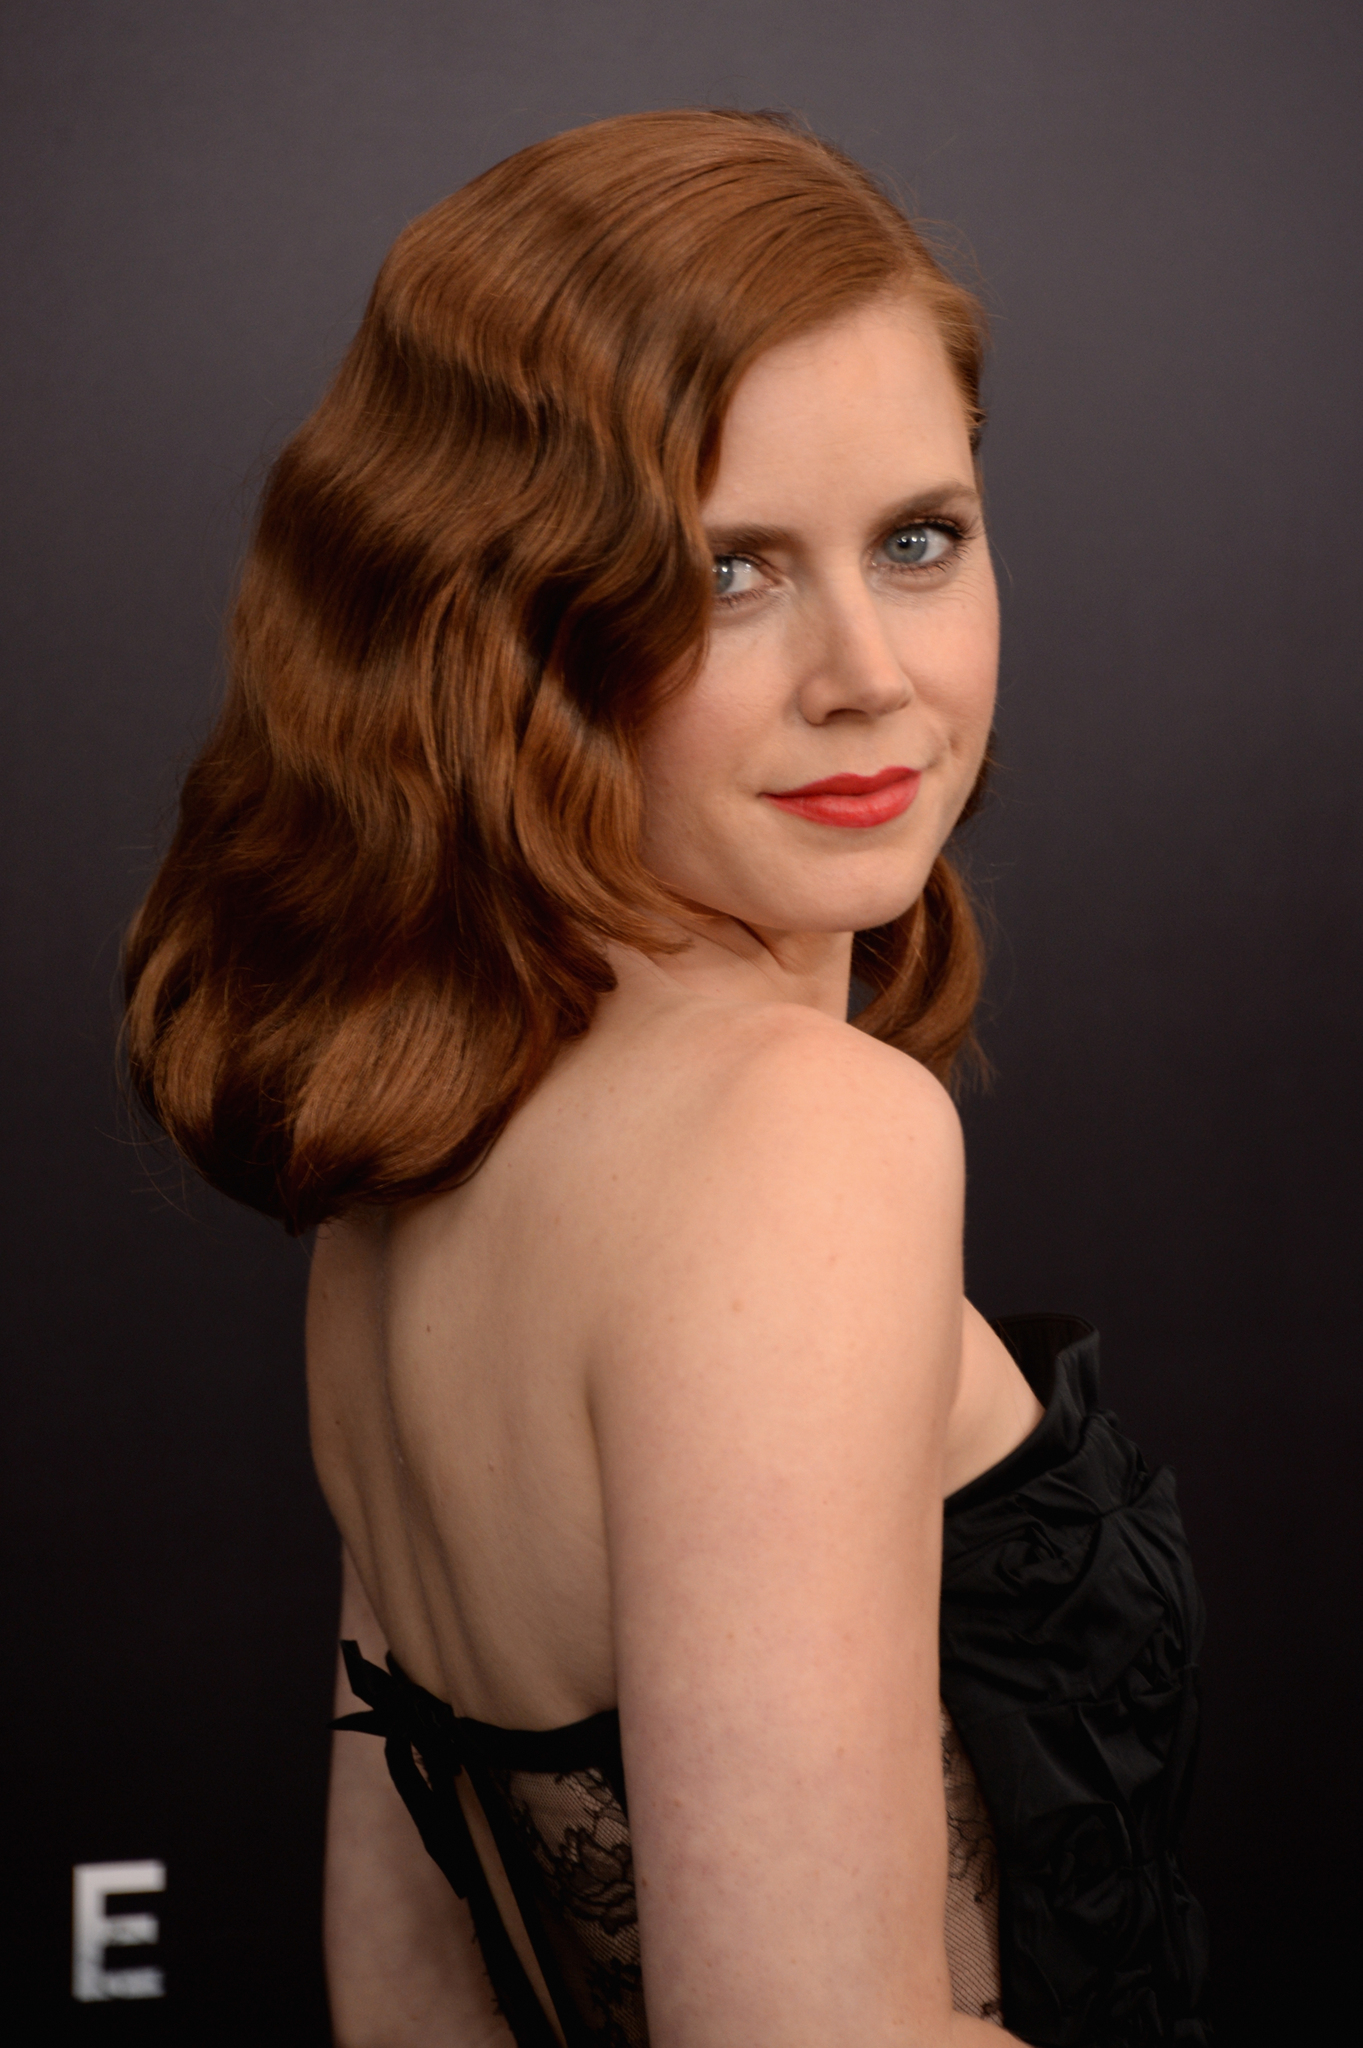 Amy Adams at event of Zmogus is plieno (2013)